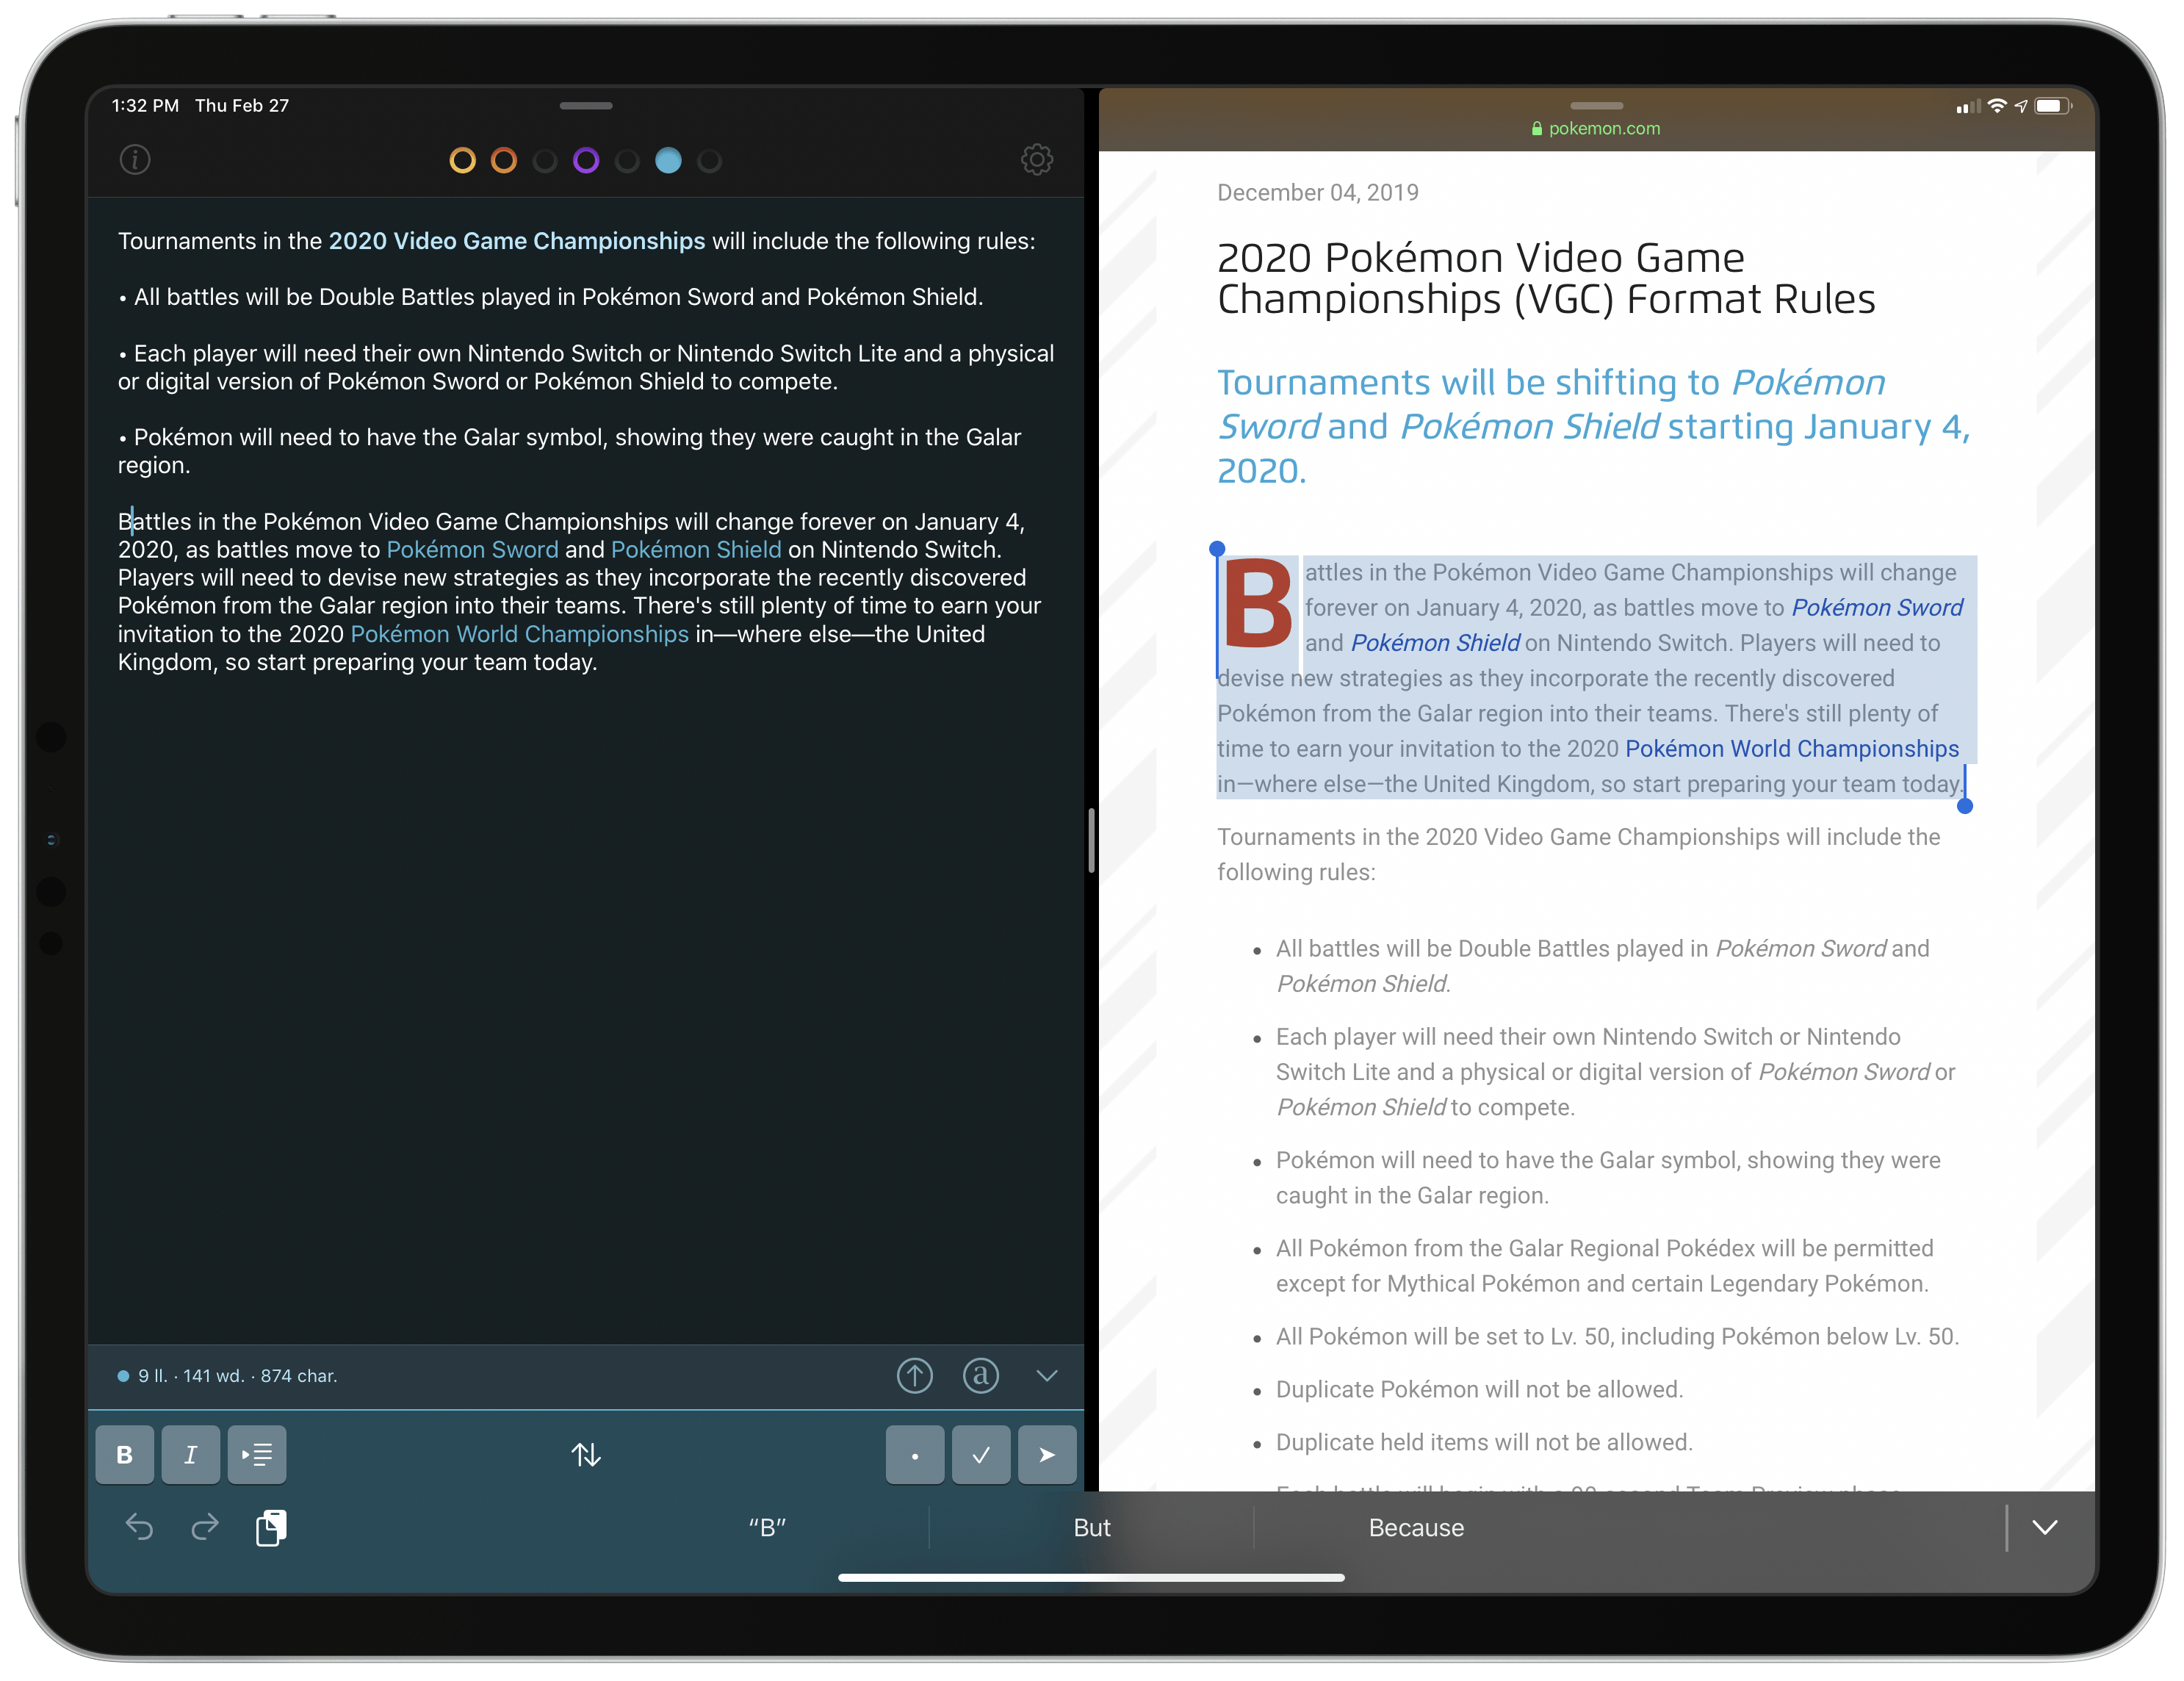 You can paste rich text in Tot, which will preserve formatting in Markdown as well.